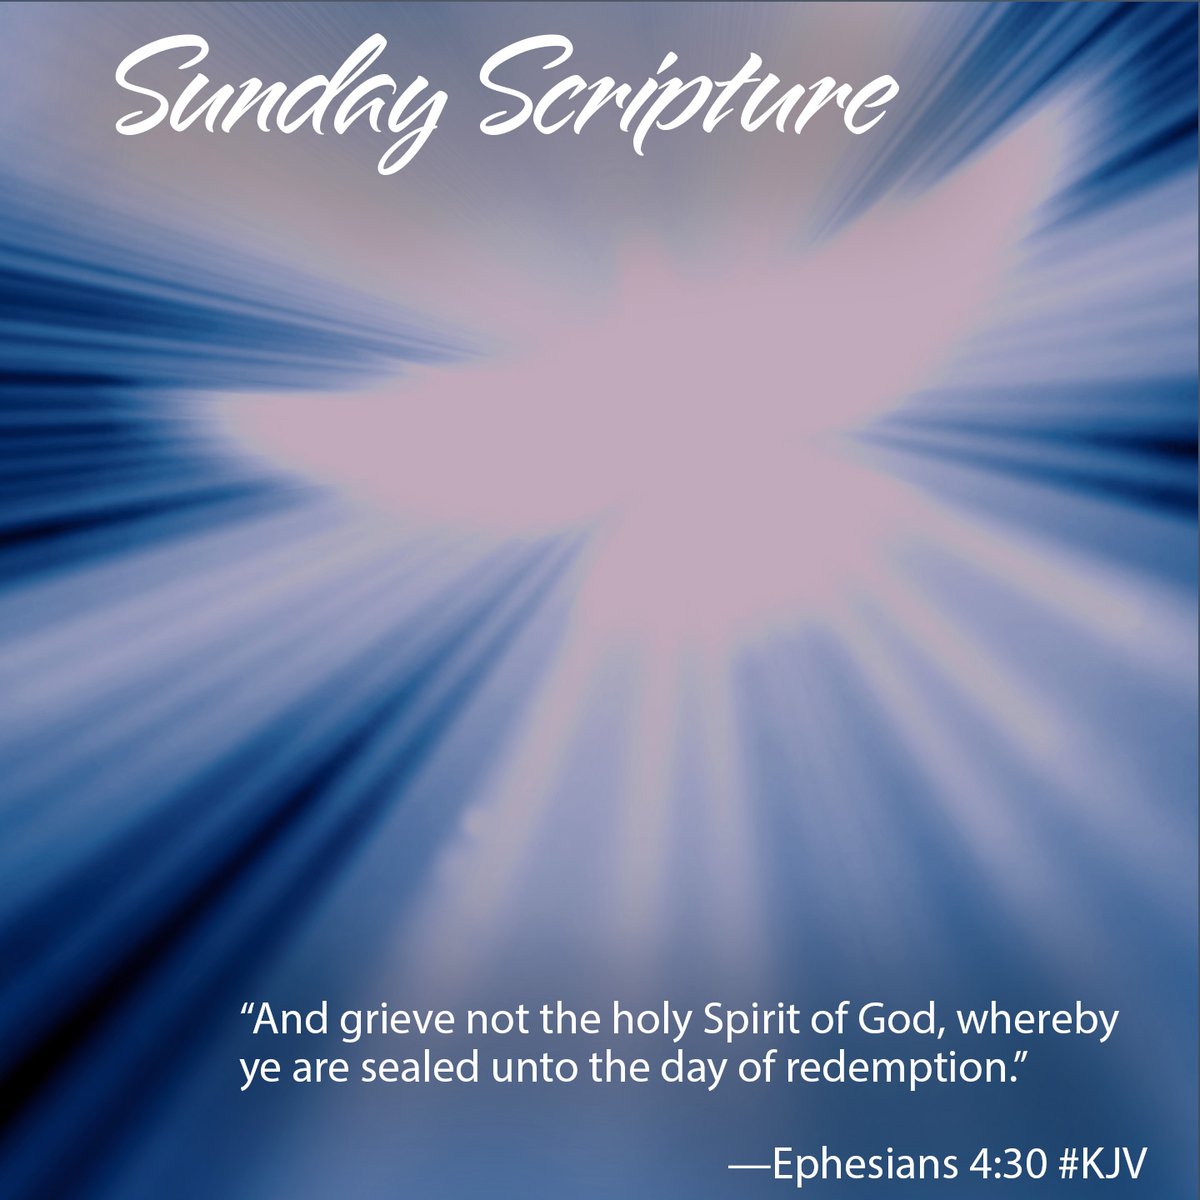 “And grieve not the holy Spirit of God, whereby ye are sealed unto the day of redemption.”

—Ephesians 4:30 (KJV)

#SundayScripture #KJV